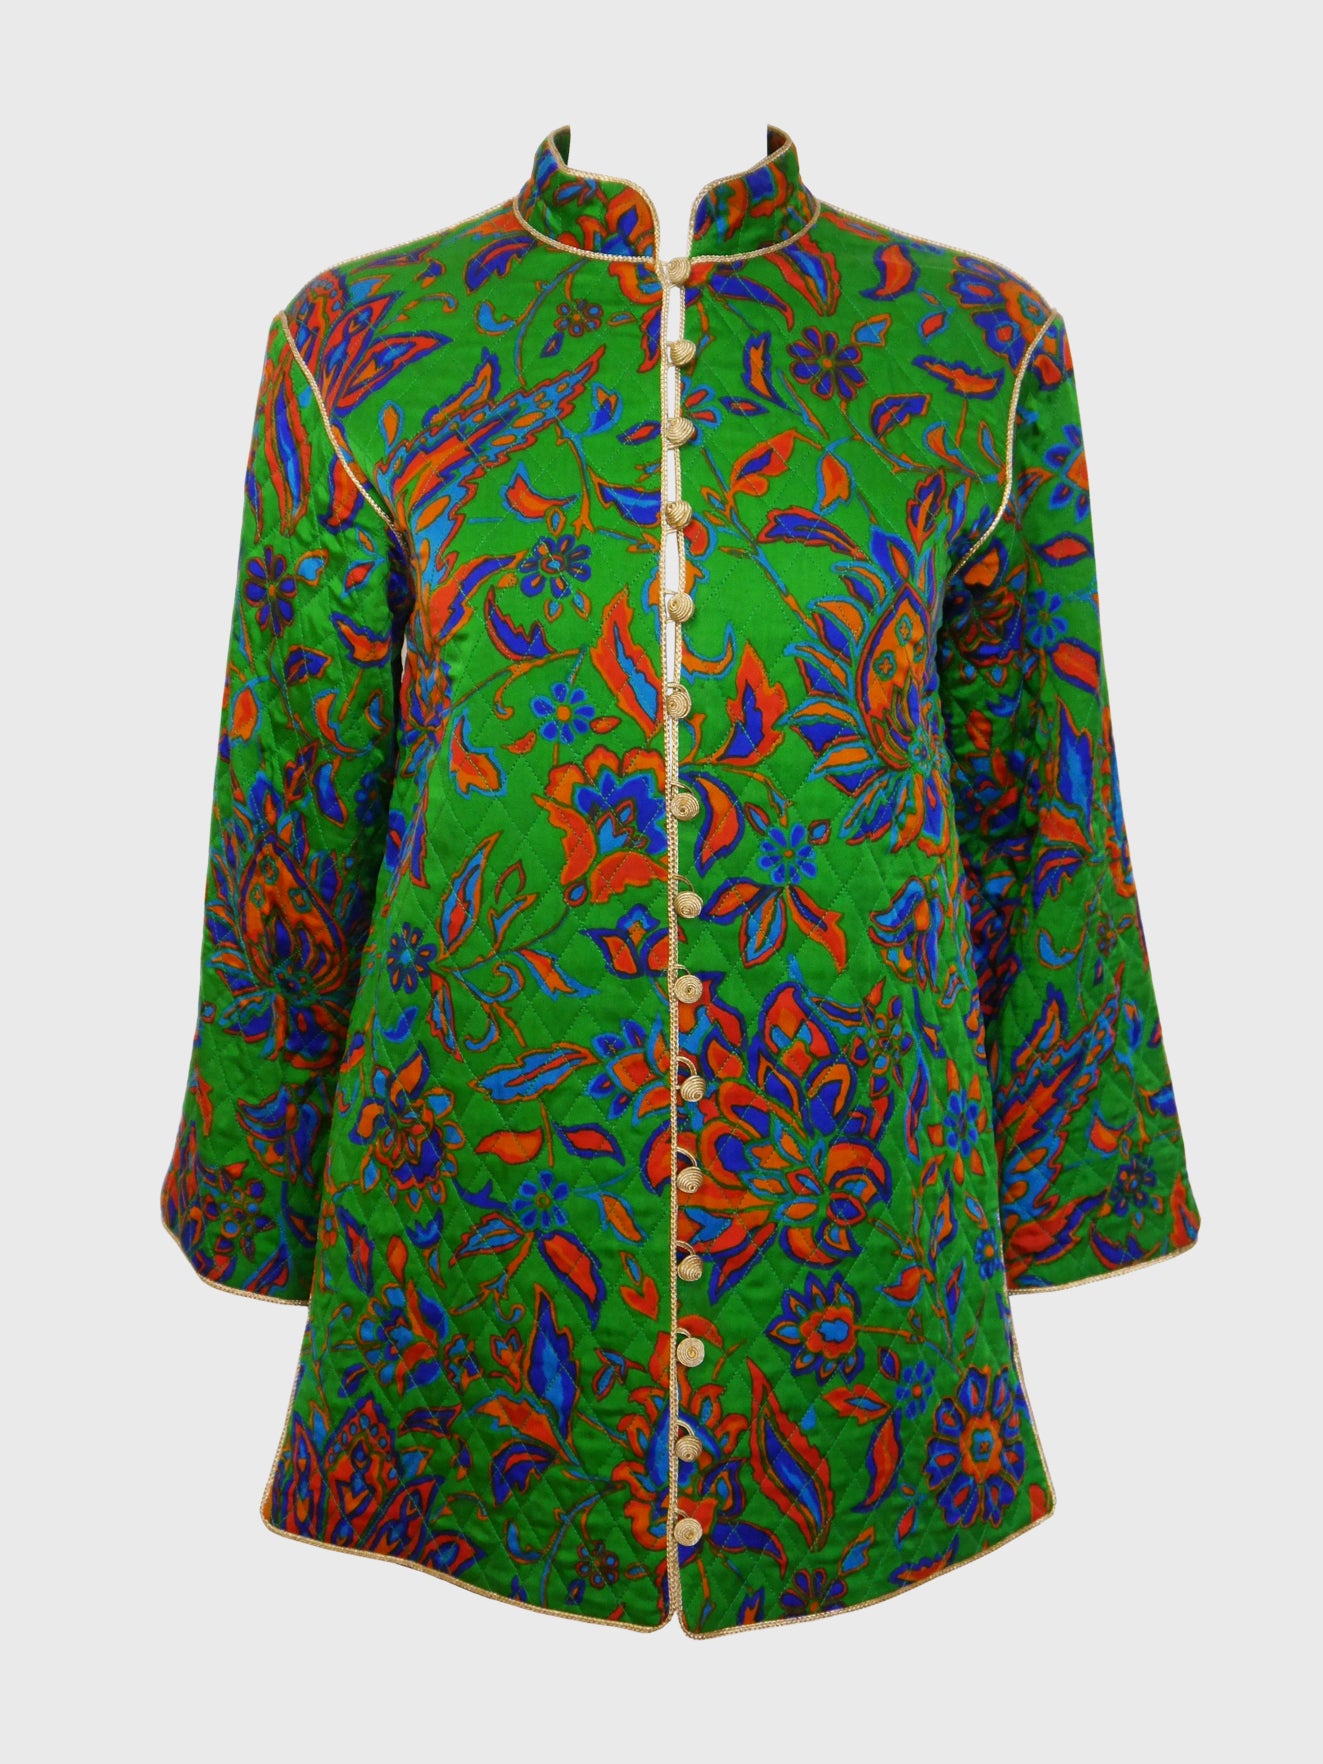 YVES SAINT LAURENT Fall 1976 Russian Collection Quilted Silk Jacket